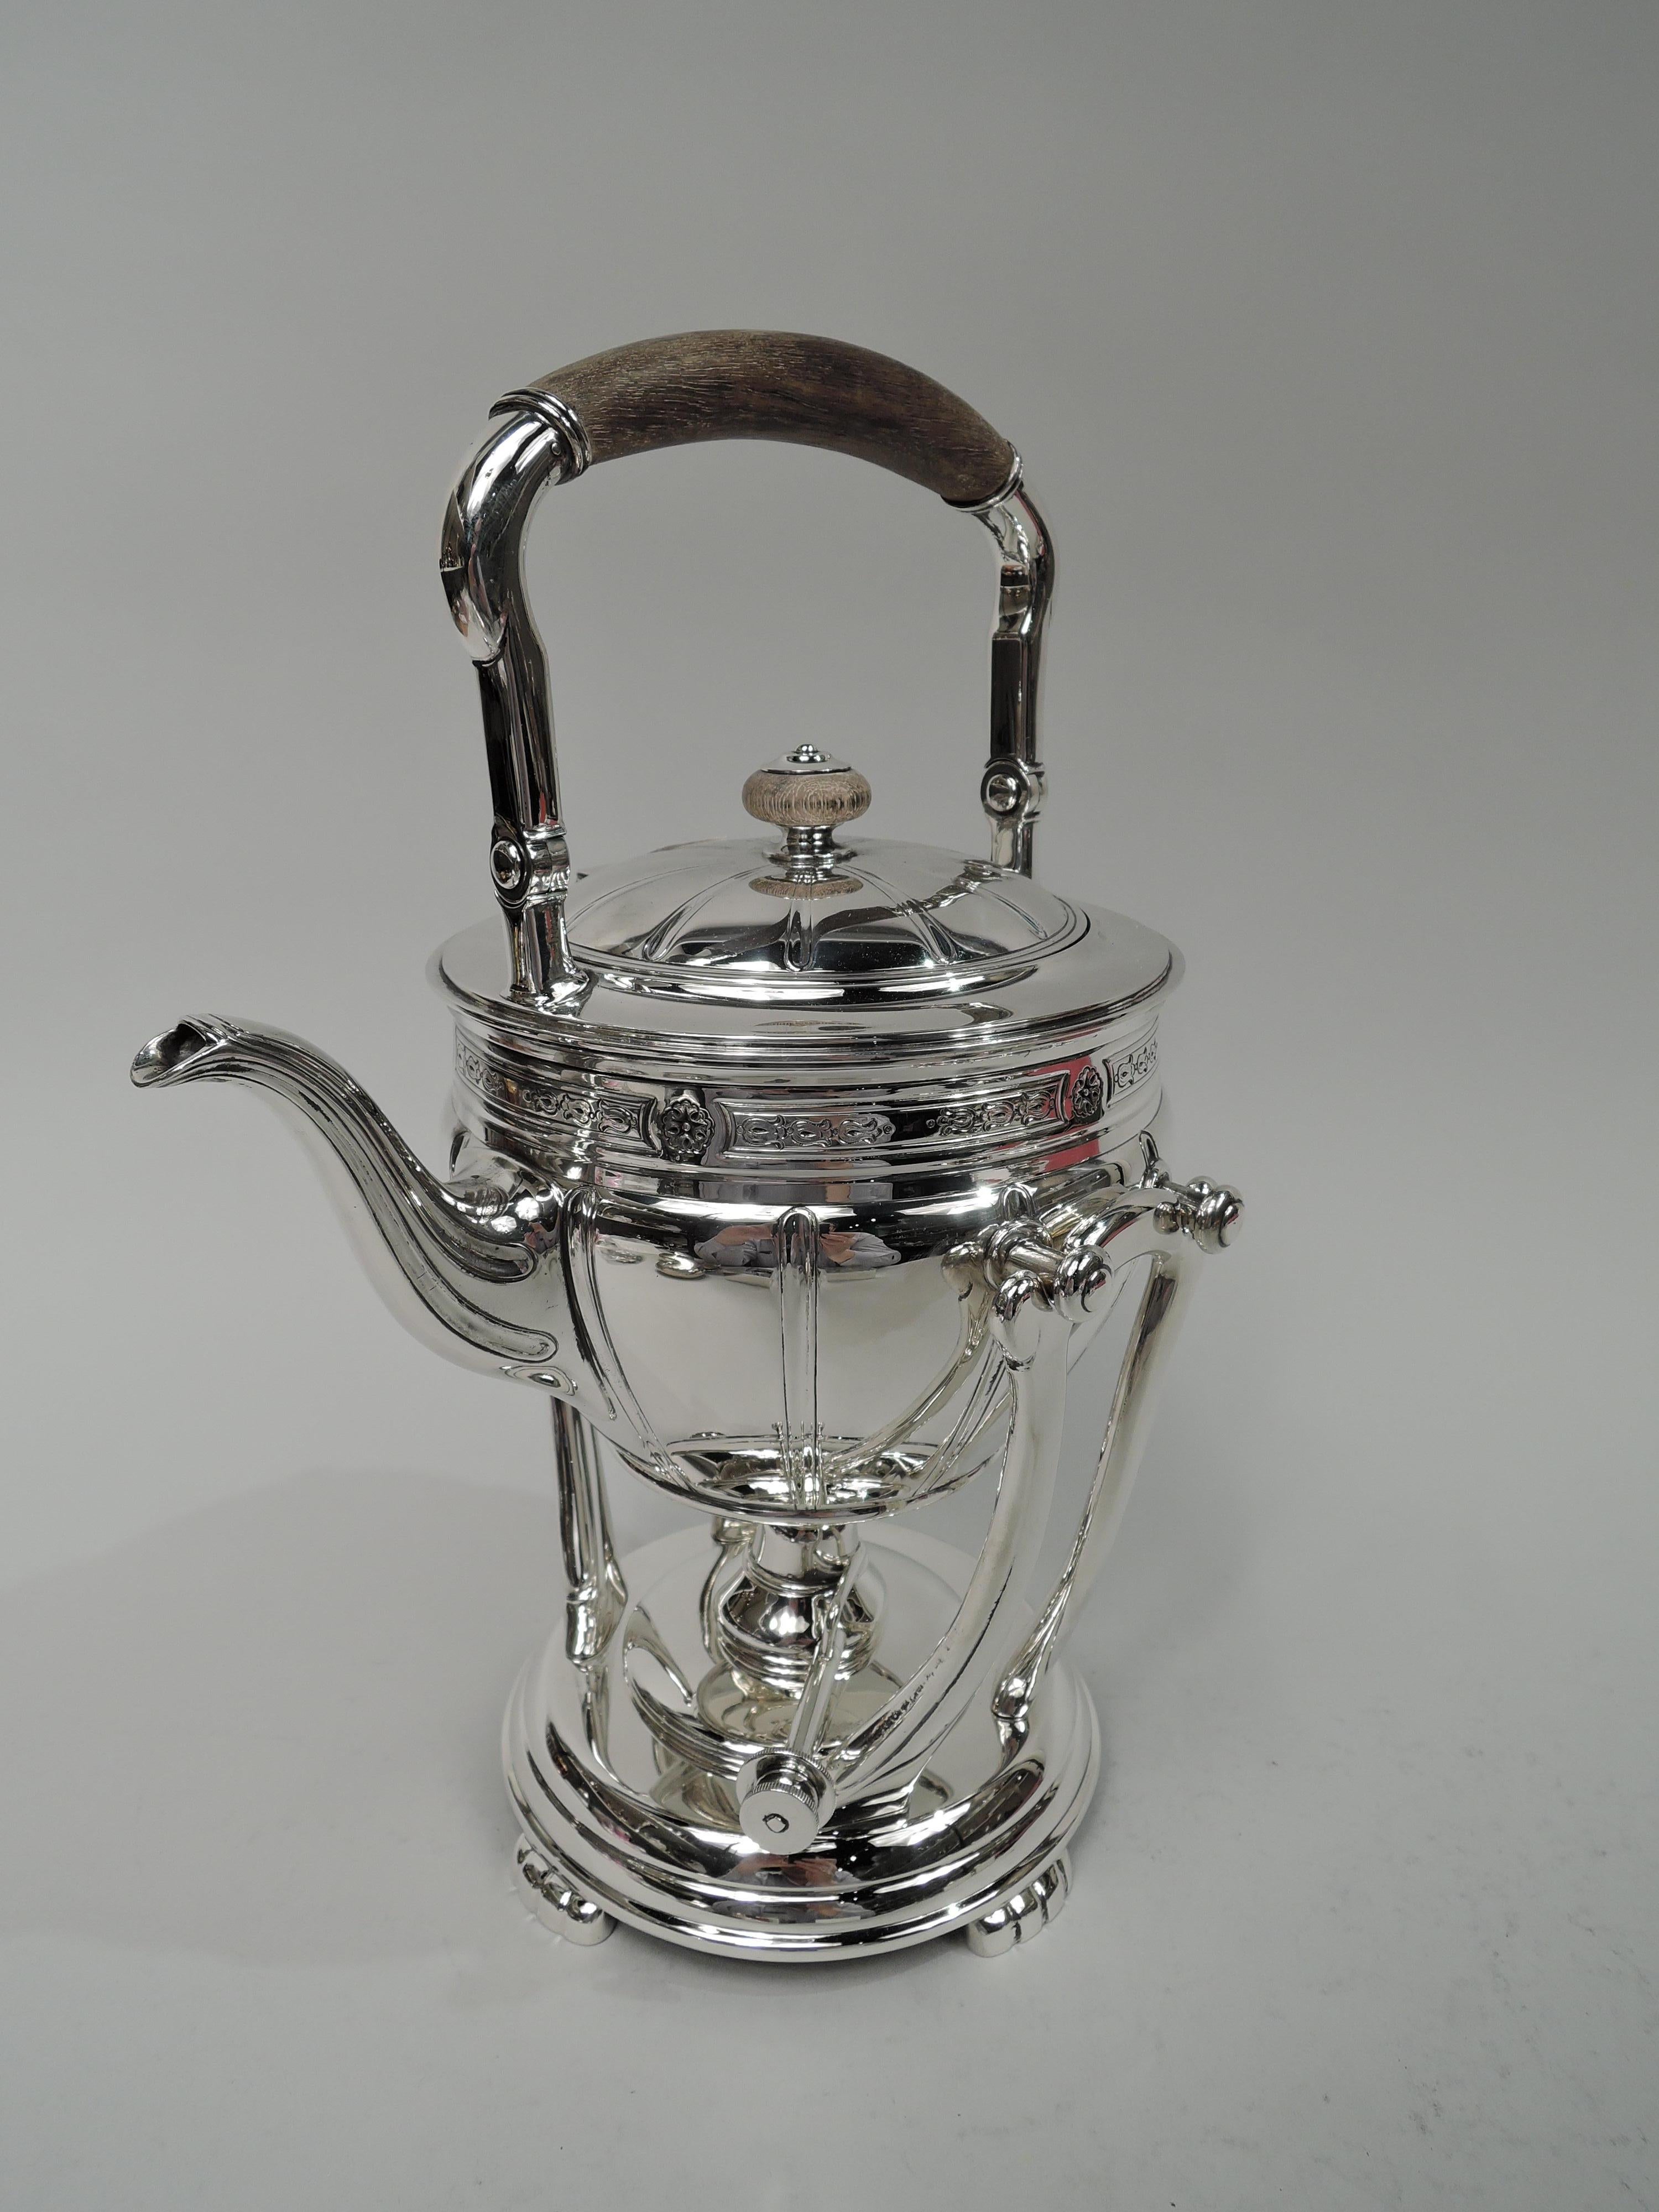 Edwardian Classical sterling silver hot water kettle on stand. Made by Tiffany & Co. in New York, ca 1908. Ovoid with flutes and ornamental border at rim comprising stylized flowers in tubular frames alternating with flower heads. Tapering s-scroll